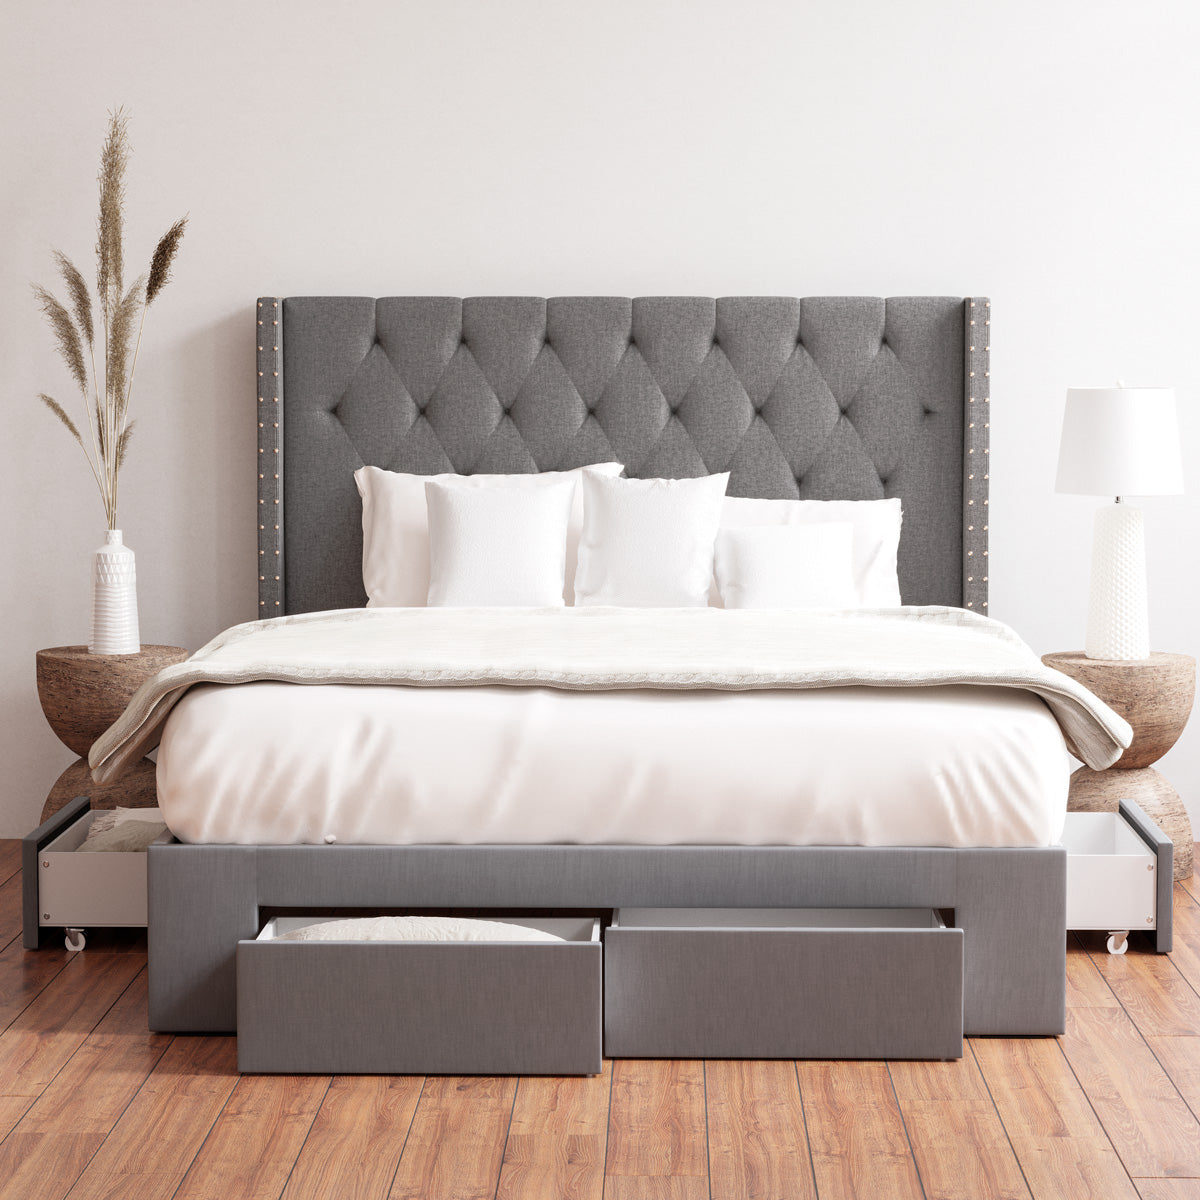 Charcoal Leonora Storage Bed Frame with Aspen Bedside Tables Package